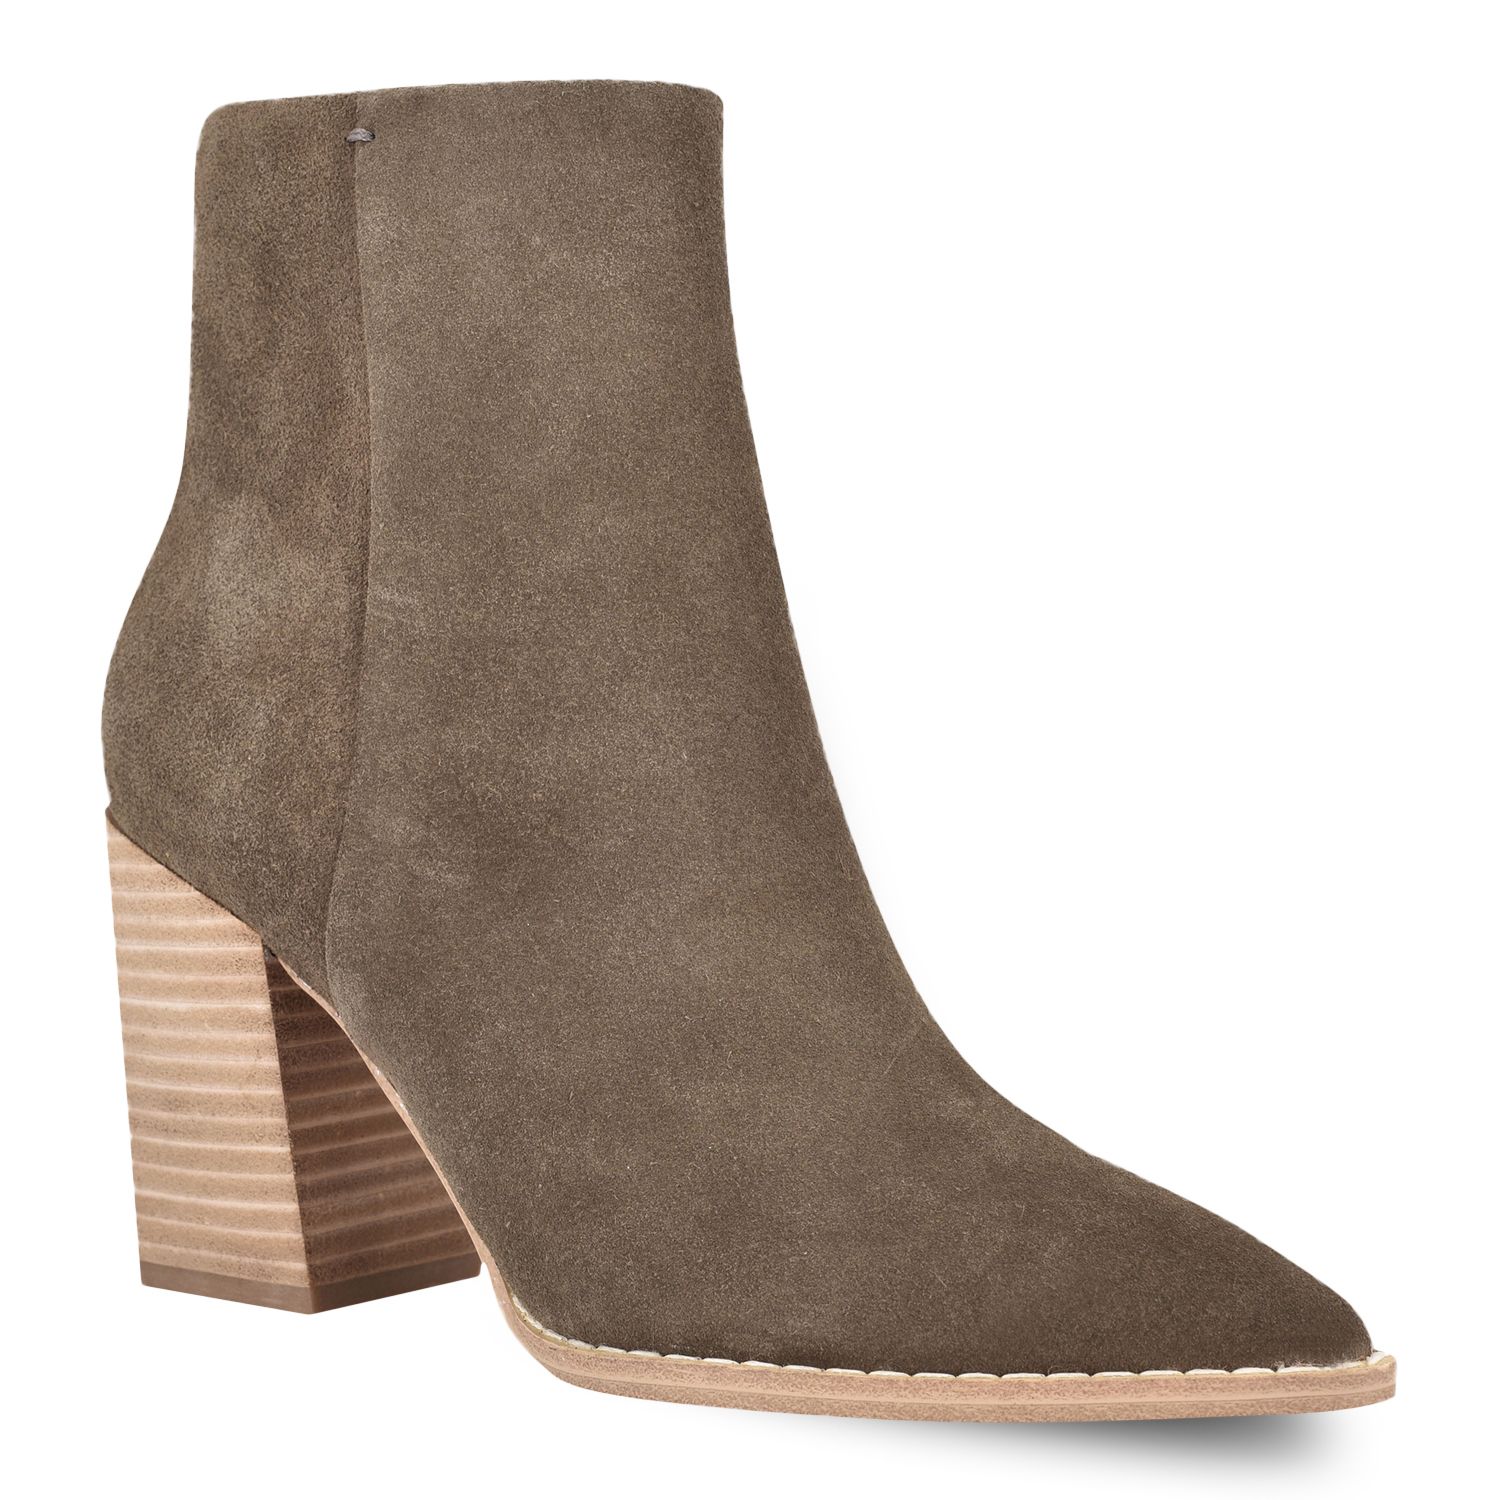 ankle booties with heel